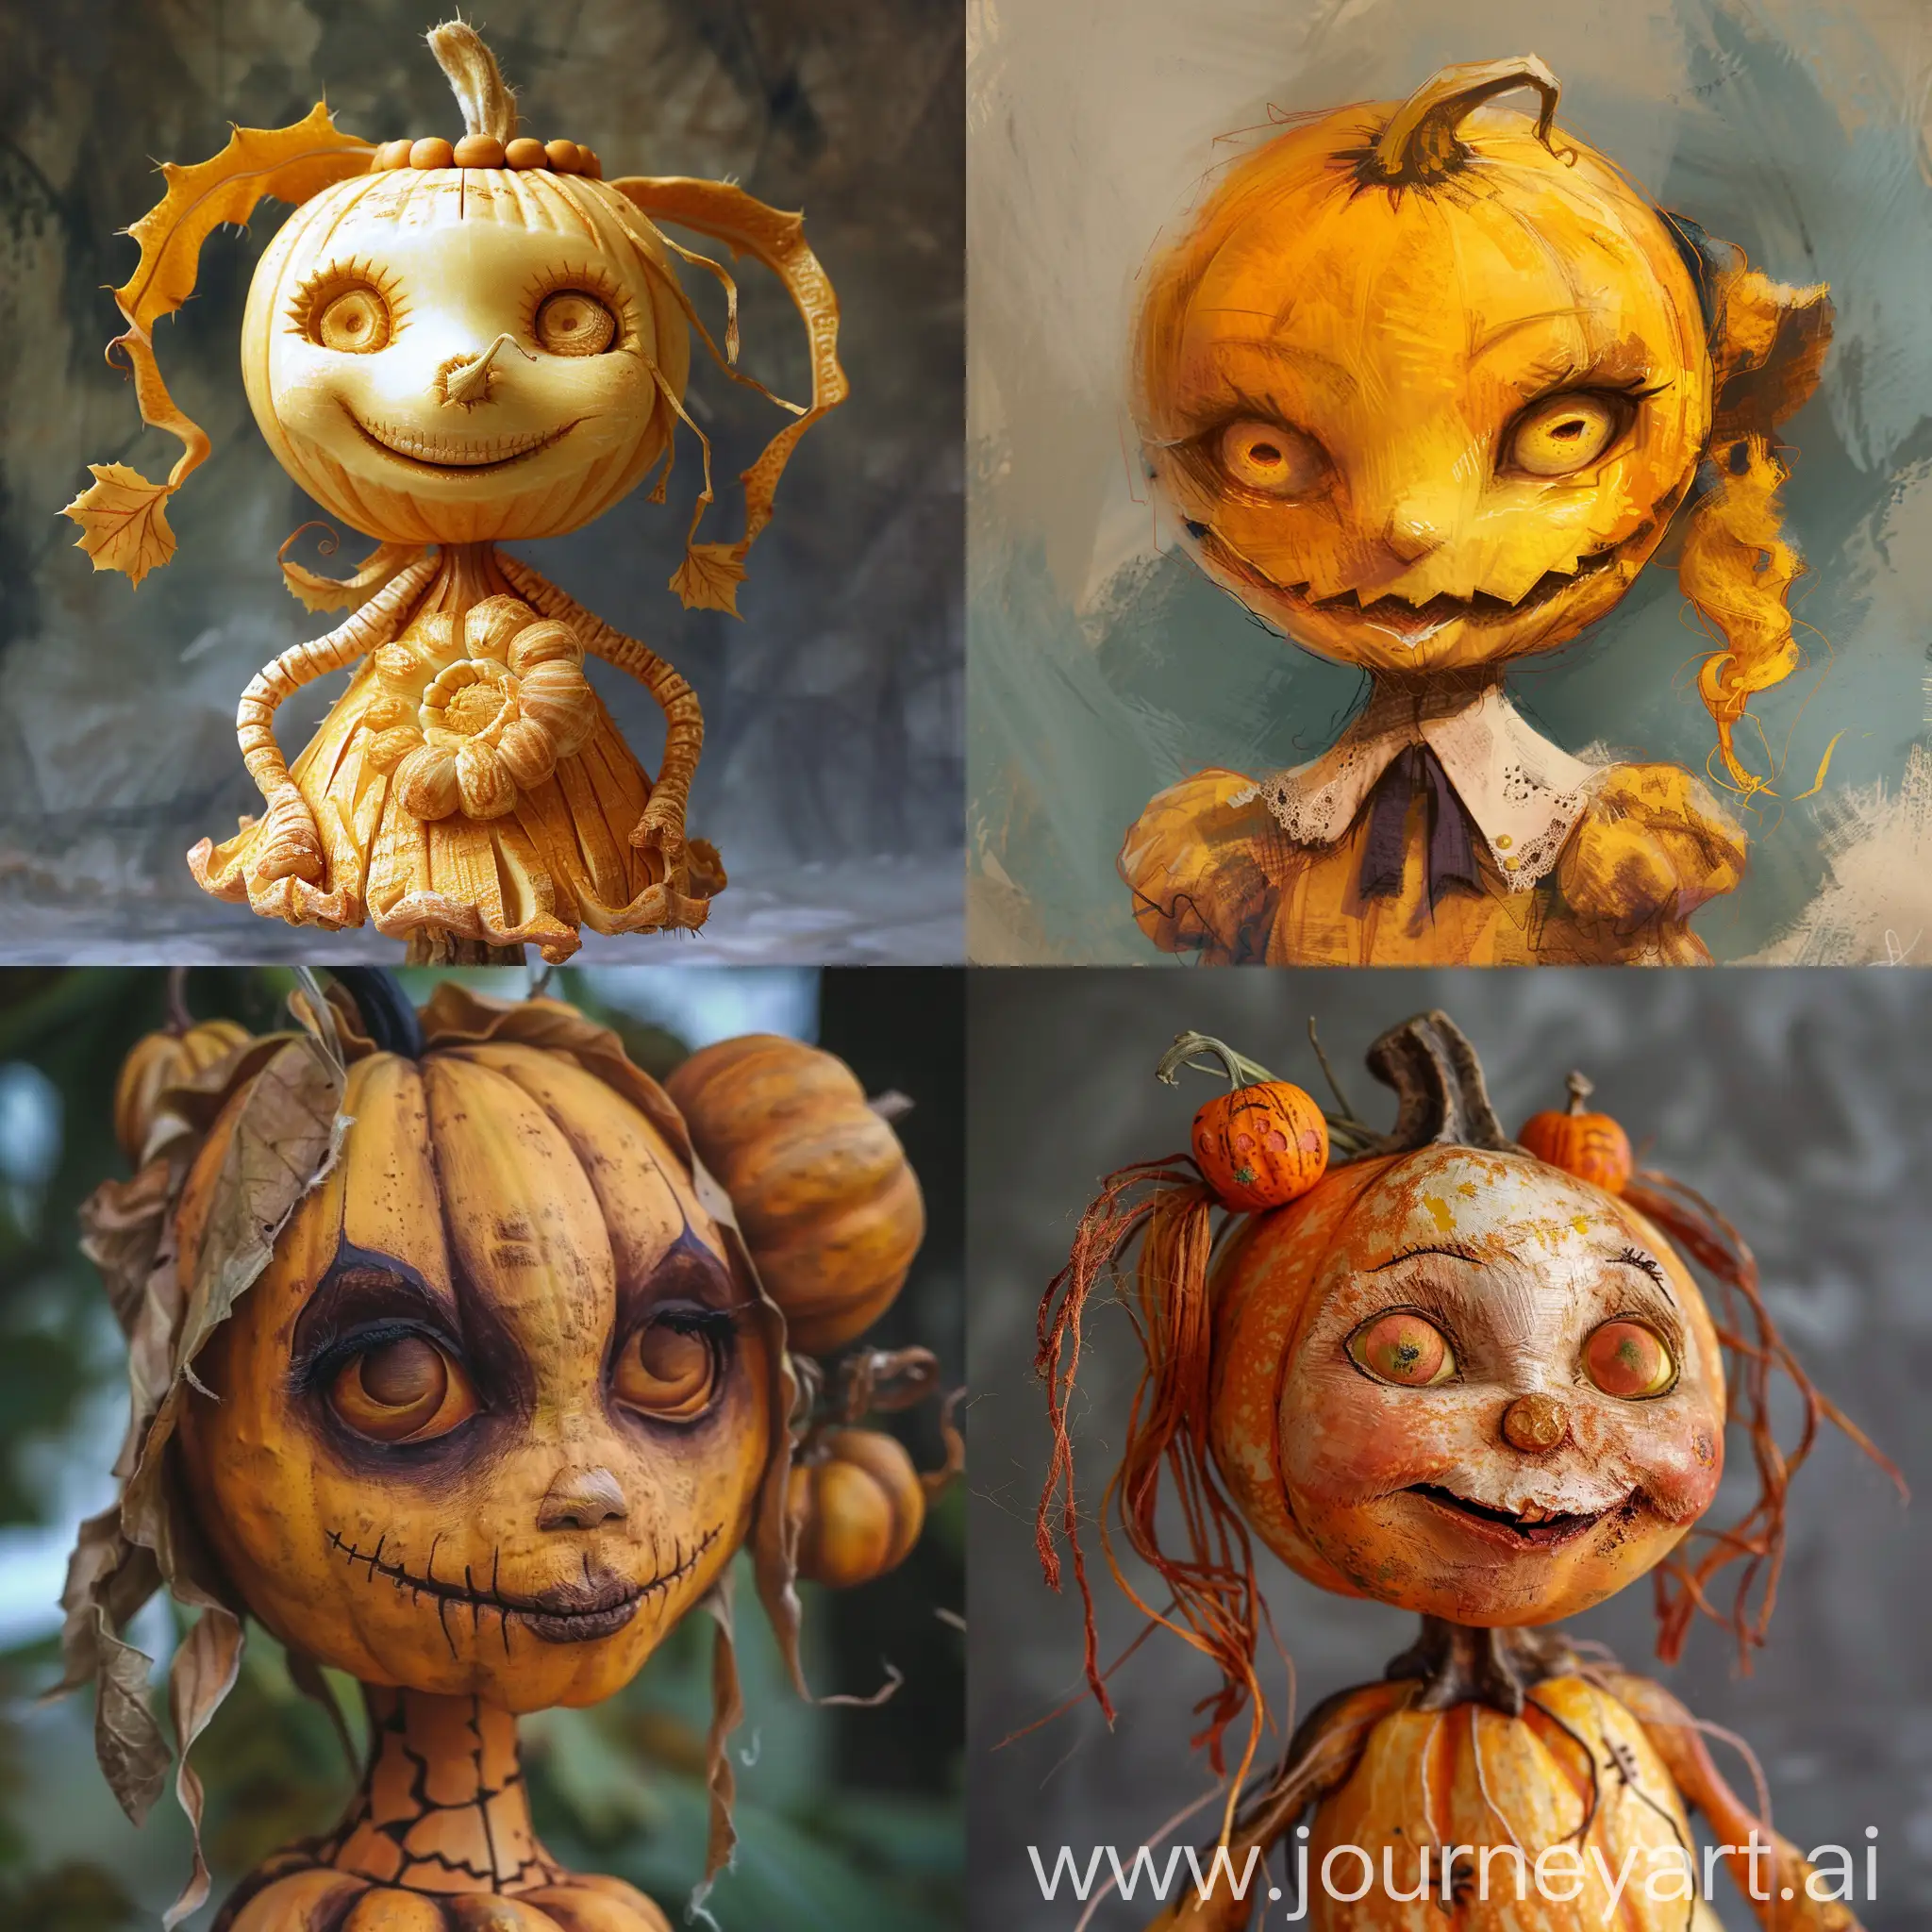 Whimsical-Humanoid-Pumpkin-Girl-with-Playful-Expression